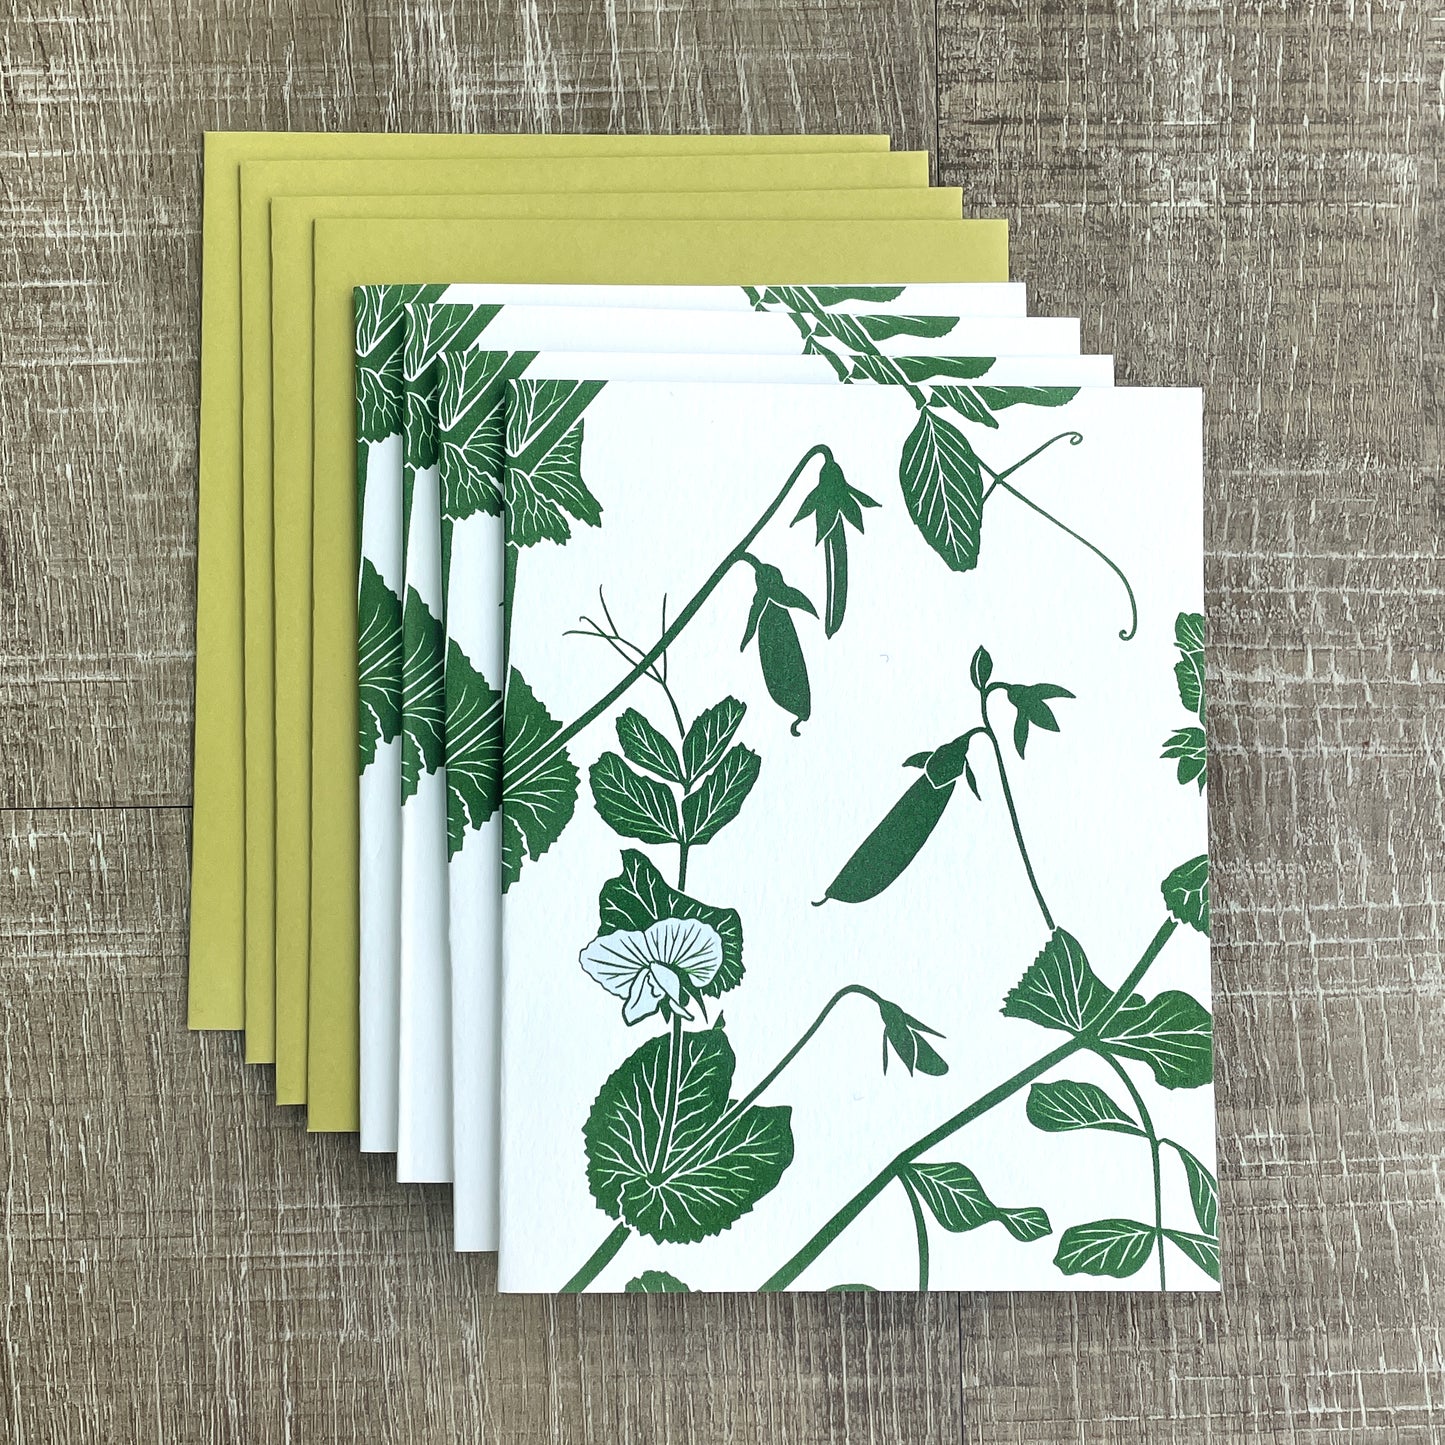 4 Snap Pea Notecards